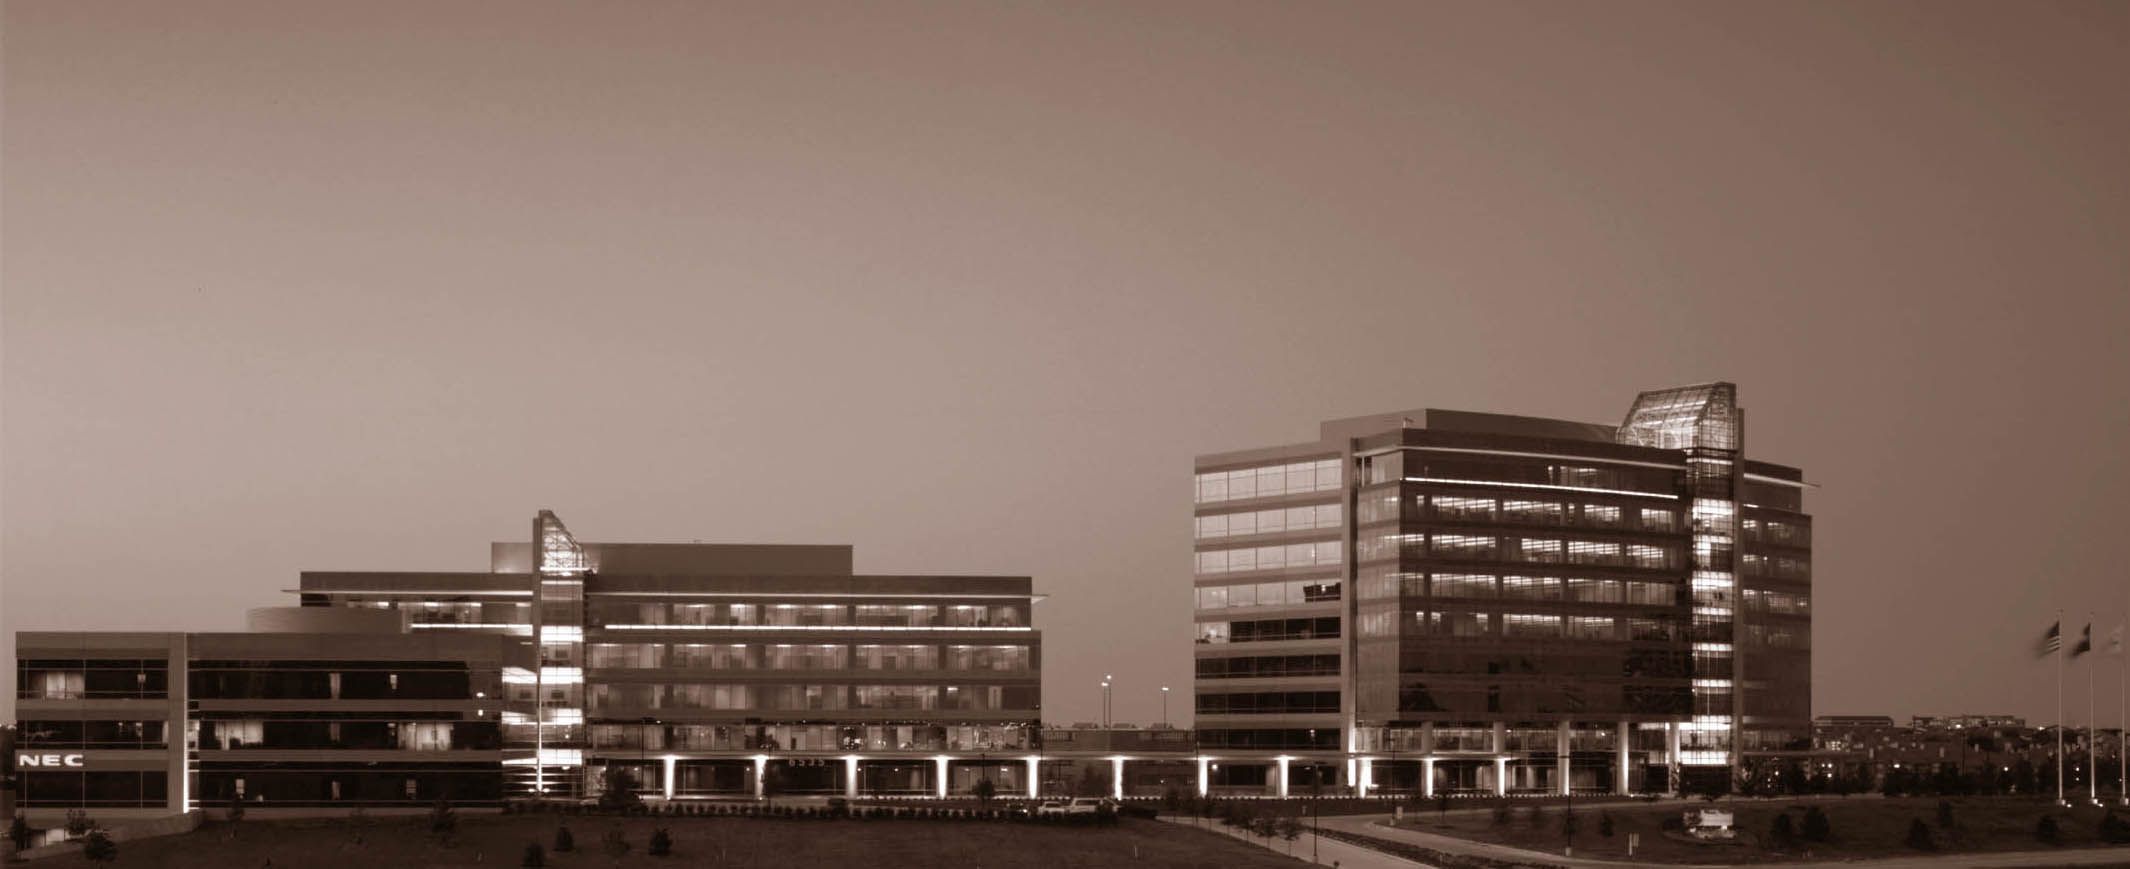 NEC’s 1999 corporate relocation to Las Colinas reflects the surge in development at that time.